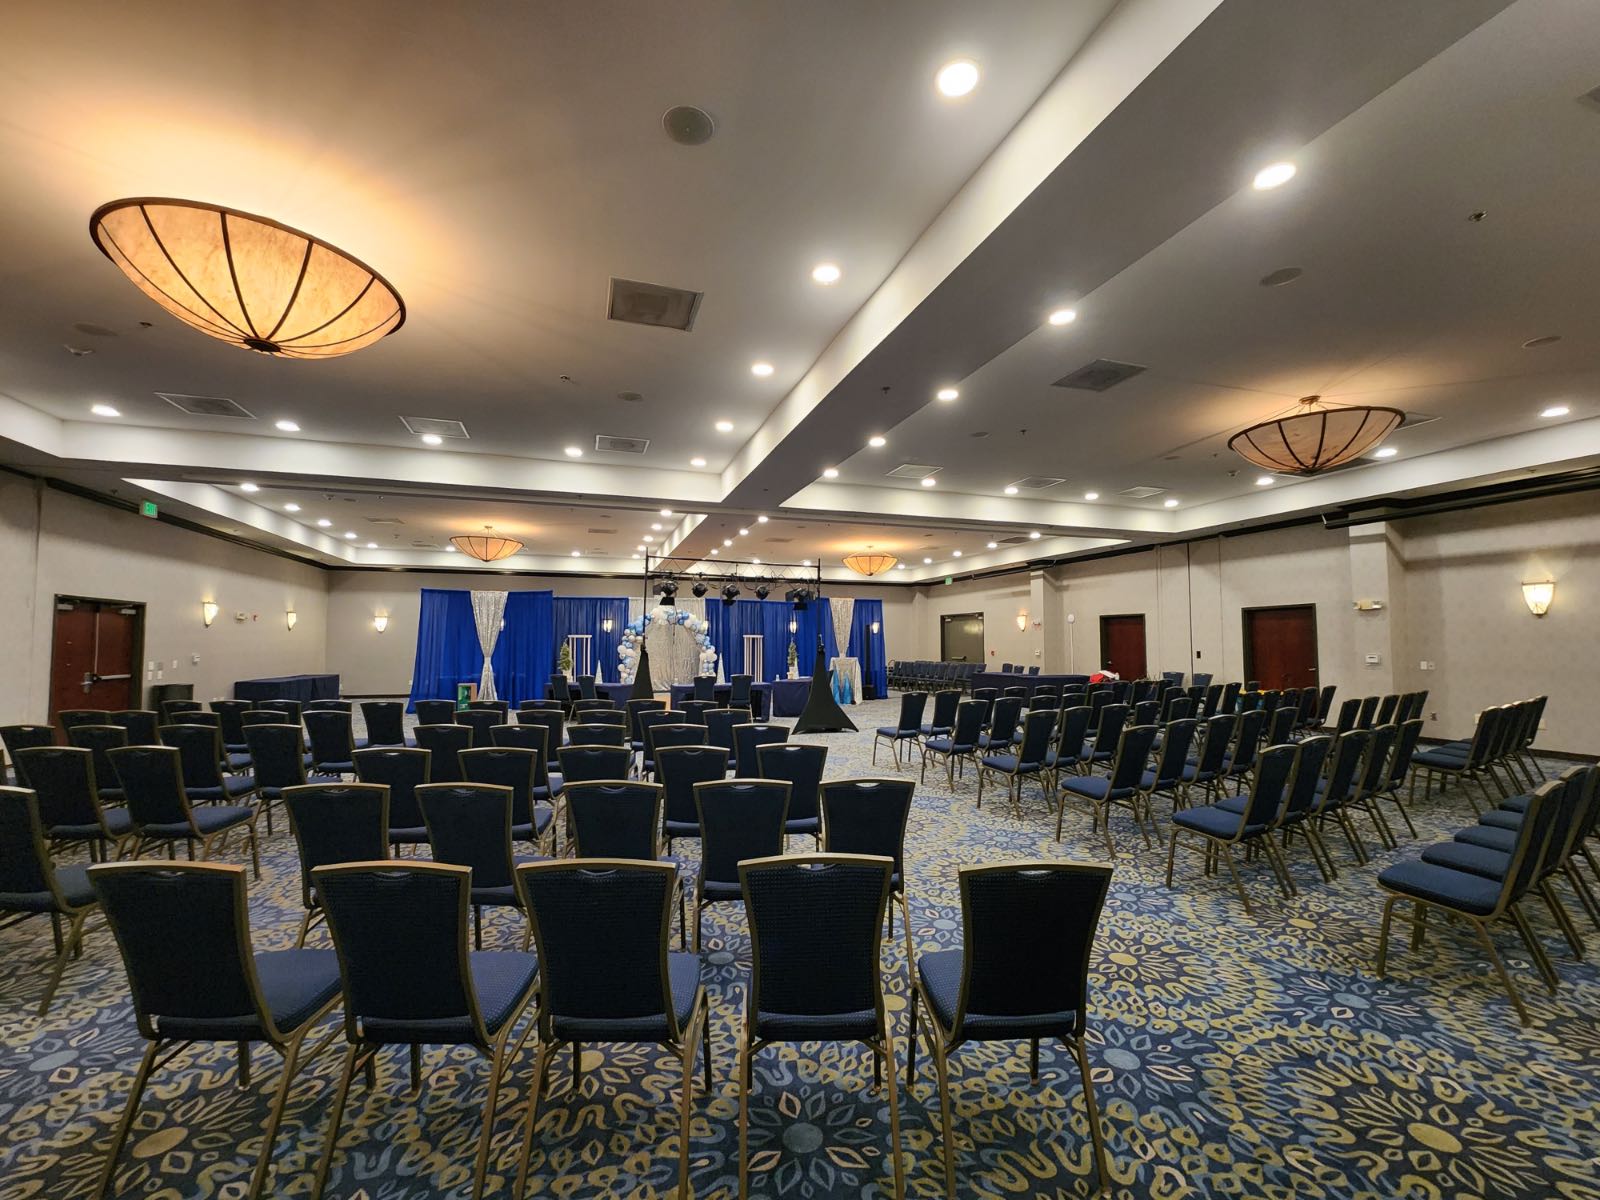 Seating and lighting in the meeting and event space